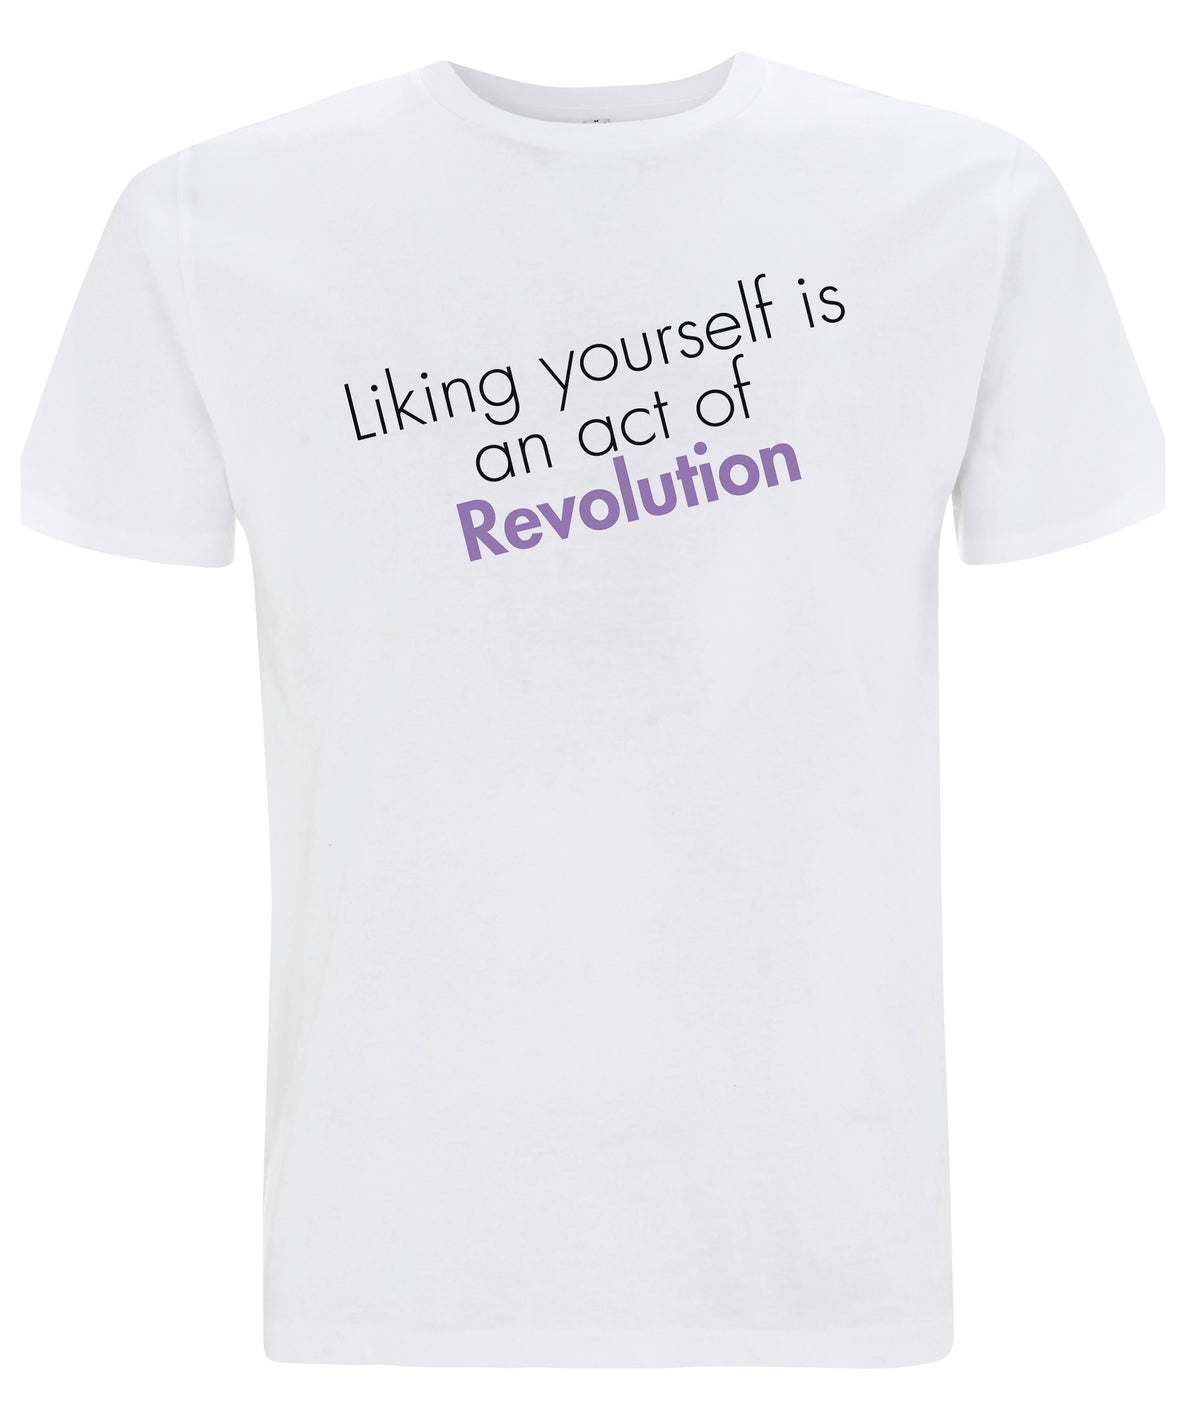 Liking Yourself Is An Act Of Revolution Organic Feminist T Shirt White